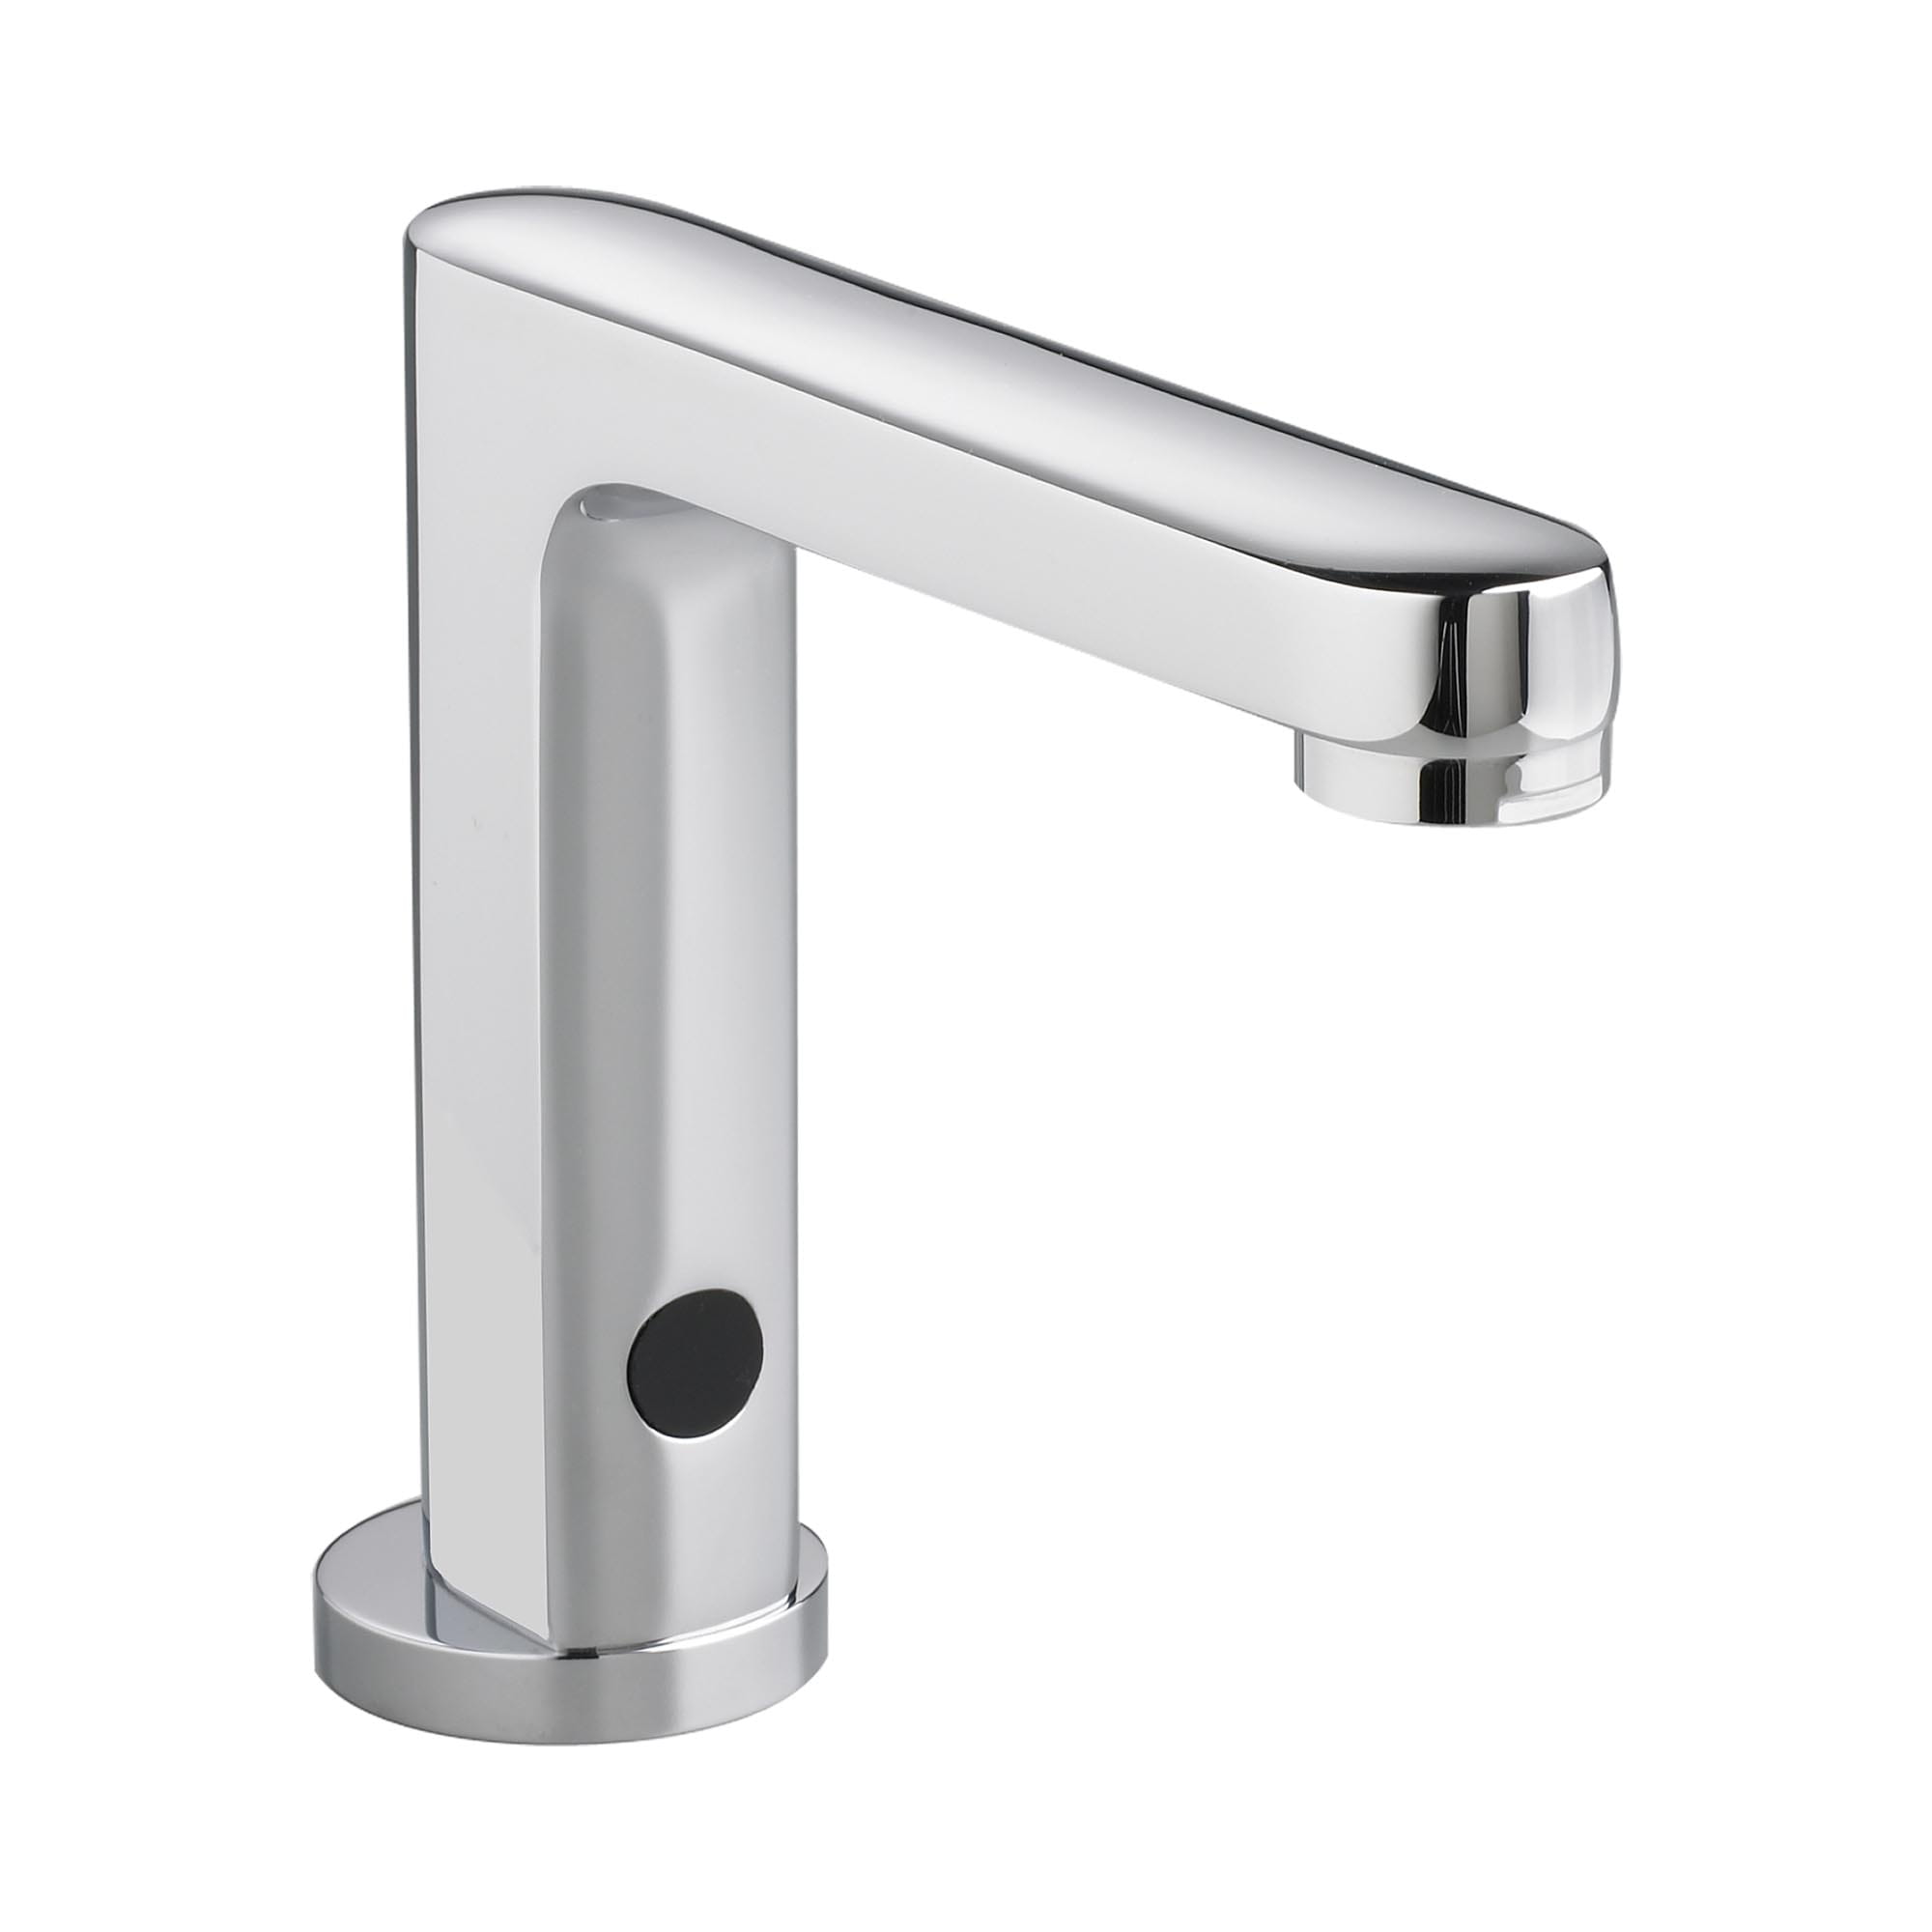 Moments® Selectronic® Touchless Faucet, Base Model, 1.5 gpm/5.7 Lpm